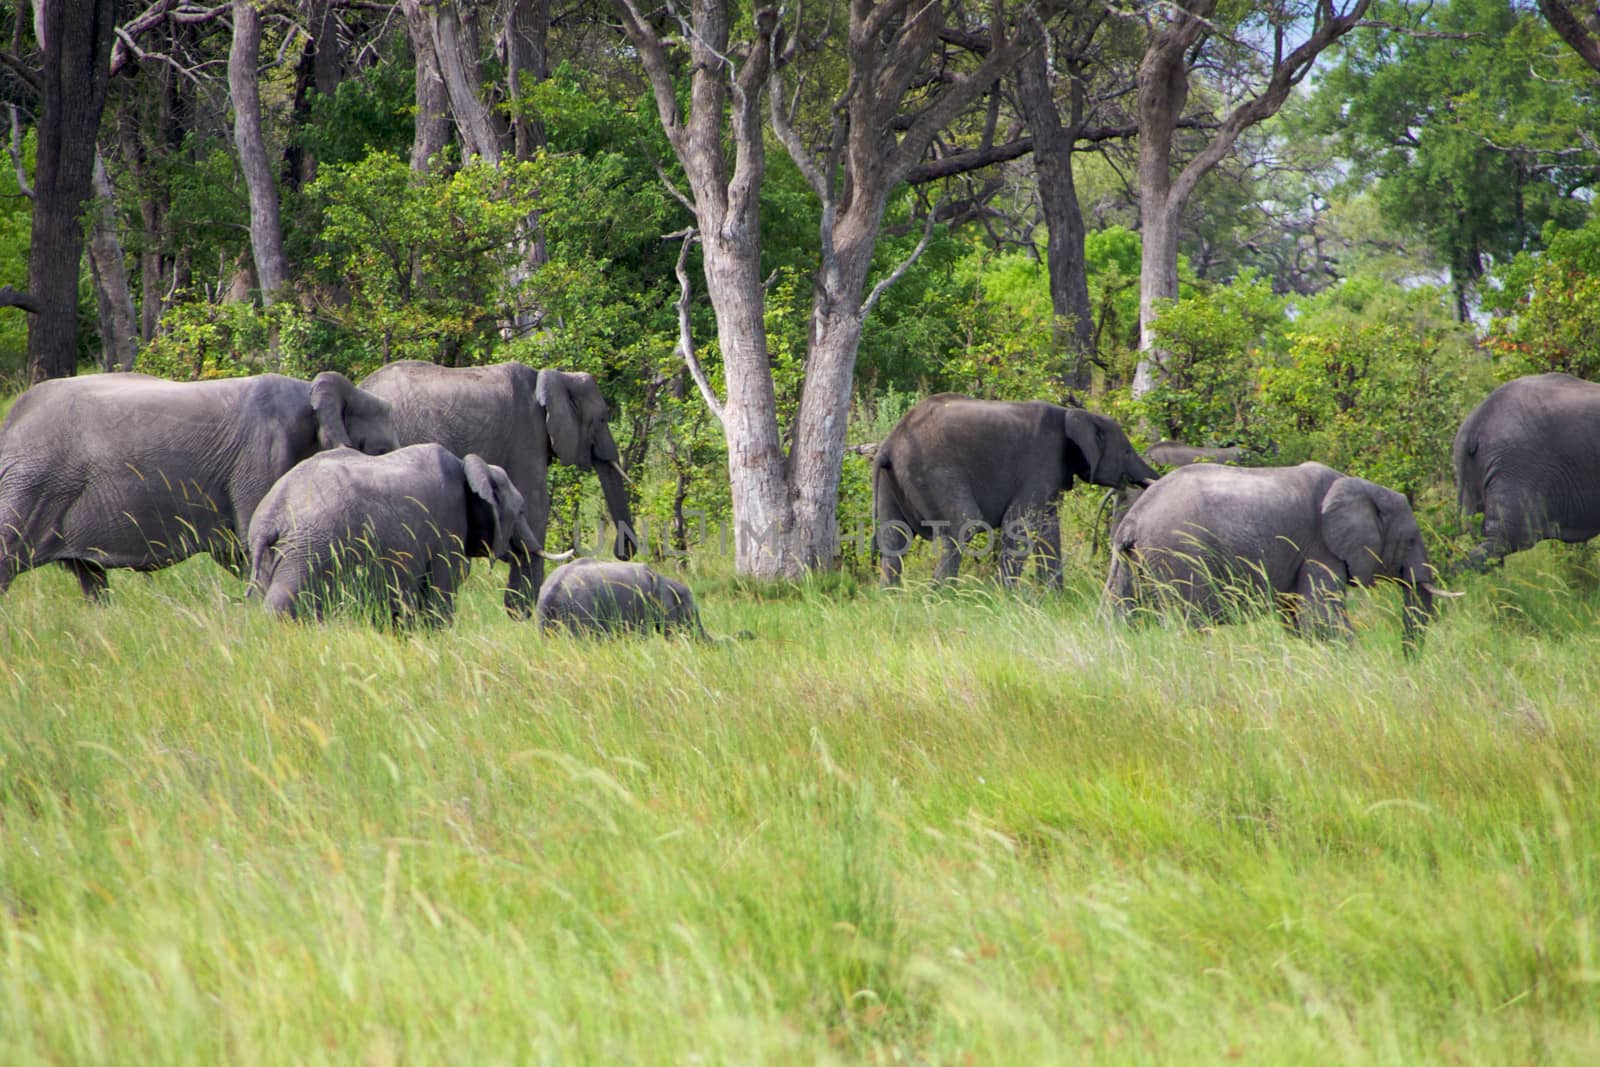 group of elephants in the bush by watchtheworld